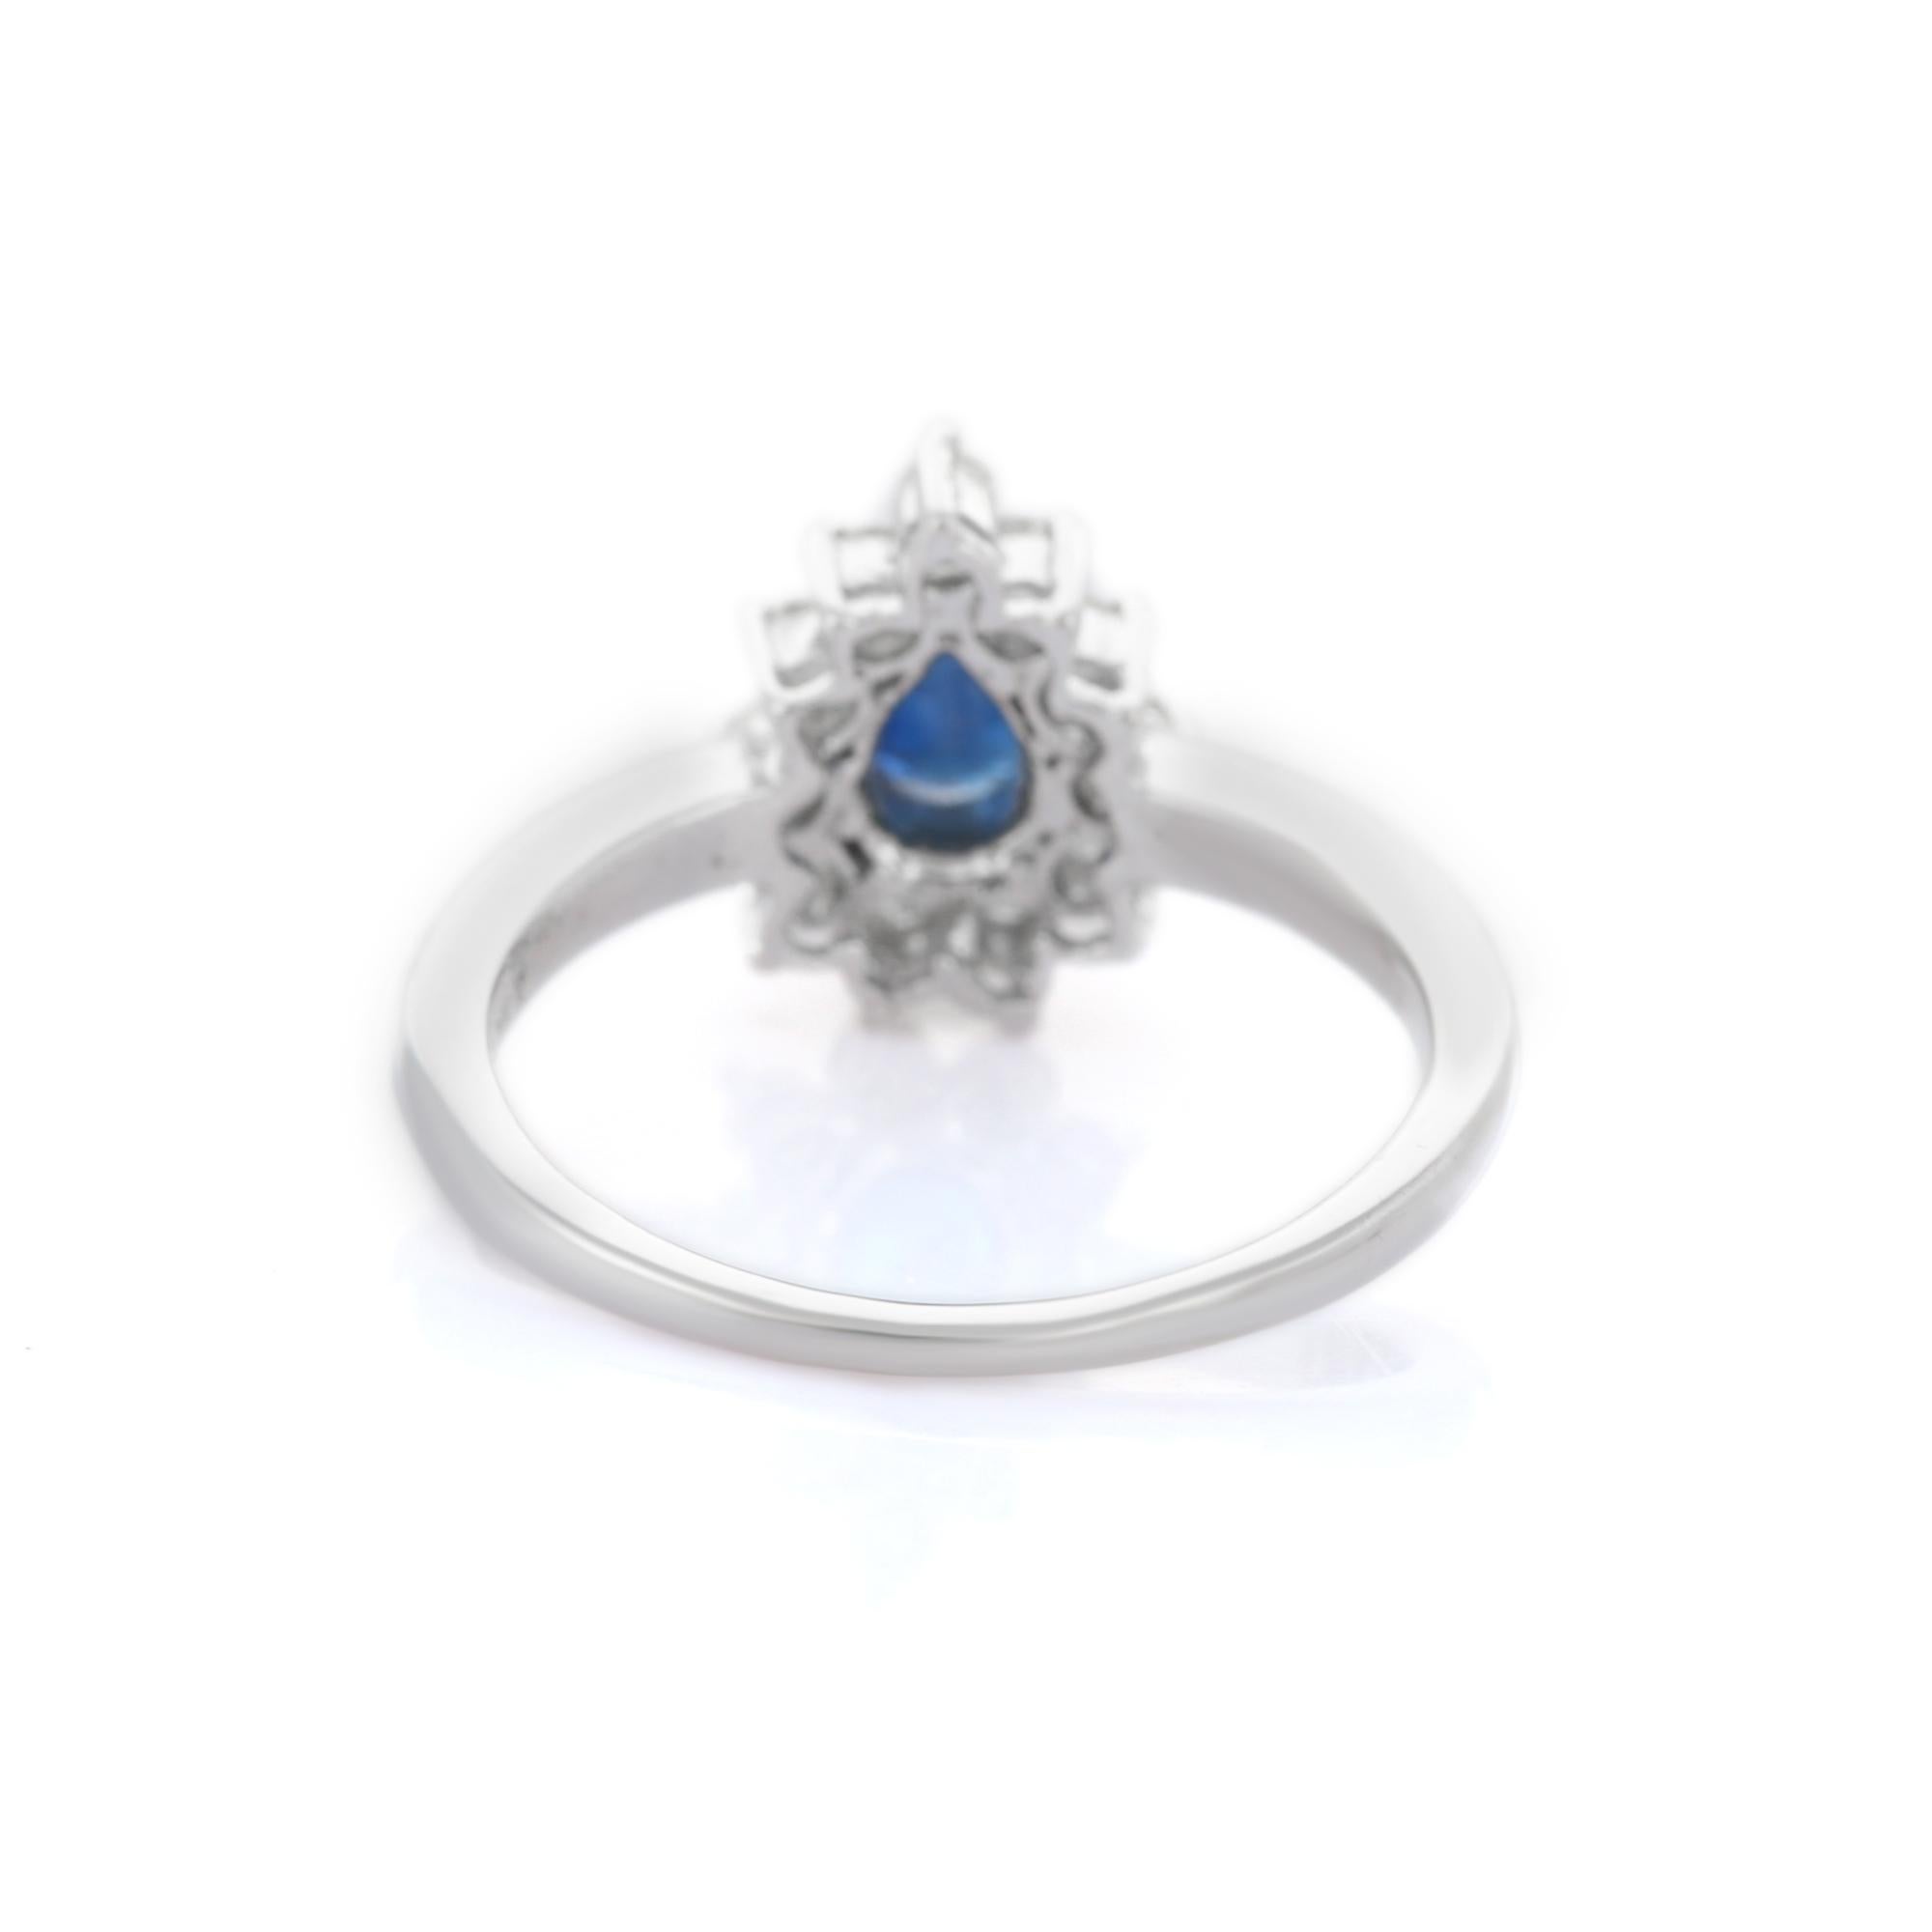 For Sale:  Handcrafted 14K White Gold Pear Cut Blue Sapphire and Halo Diamond Ring 4